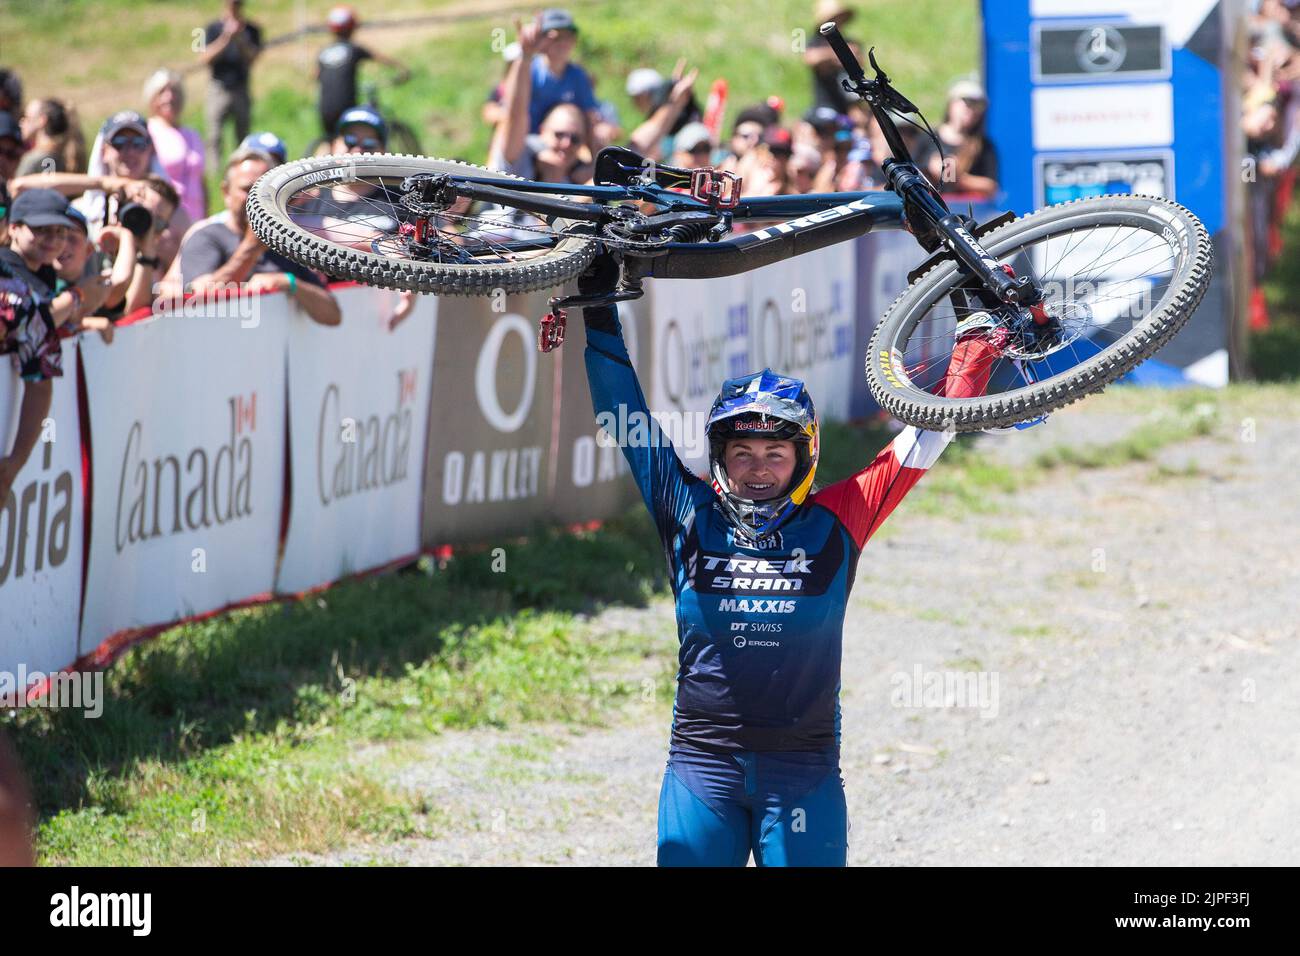 August 06, 2022: Valentina Holl of Austria (3) raises her bike in celebration of winning the WomenÕs Downhill Final during the 2022 Mercedes-Benz UCI Mountain Bike World Cup held at Mont-Sainte-Anne in Beaupre, Quebec, Canada. Daniel Lea/CSM Stock Photo